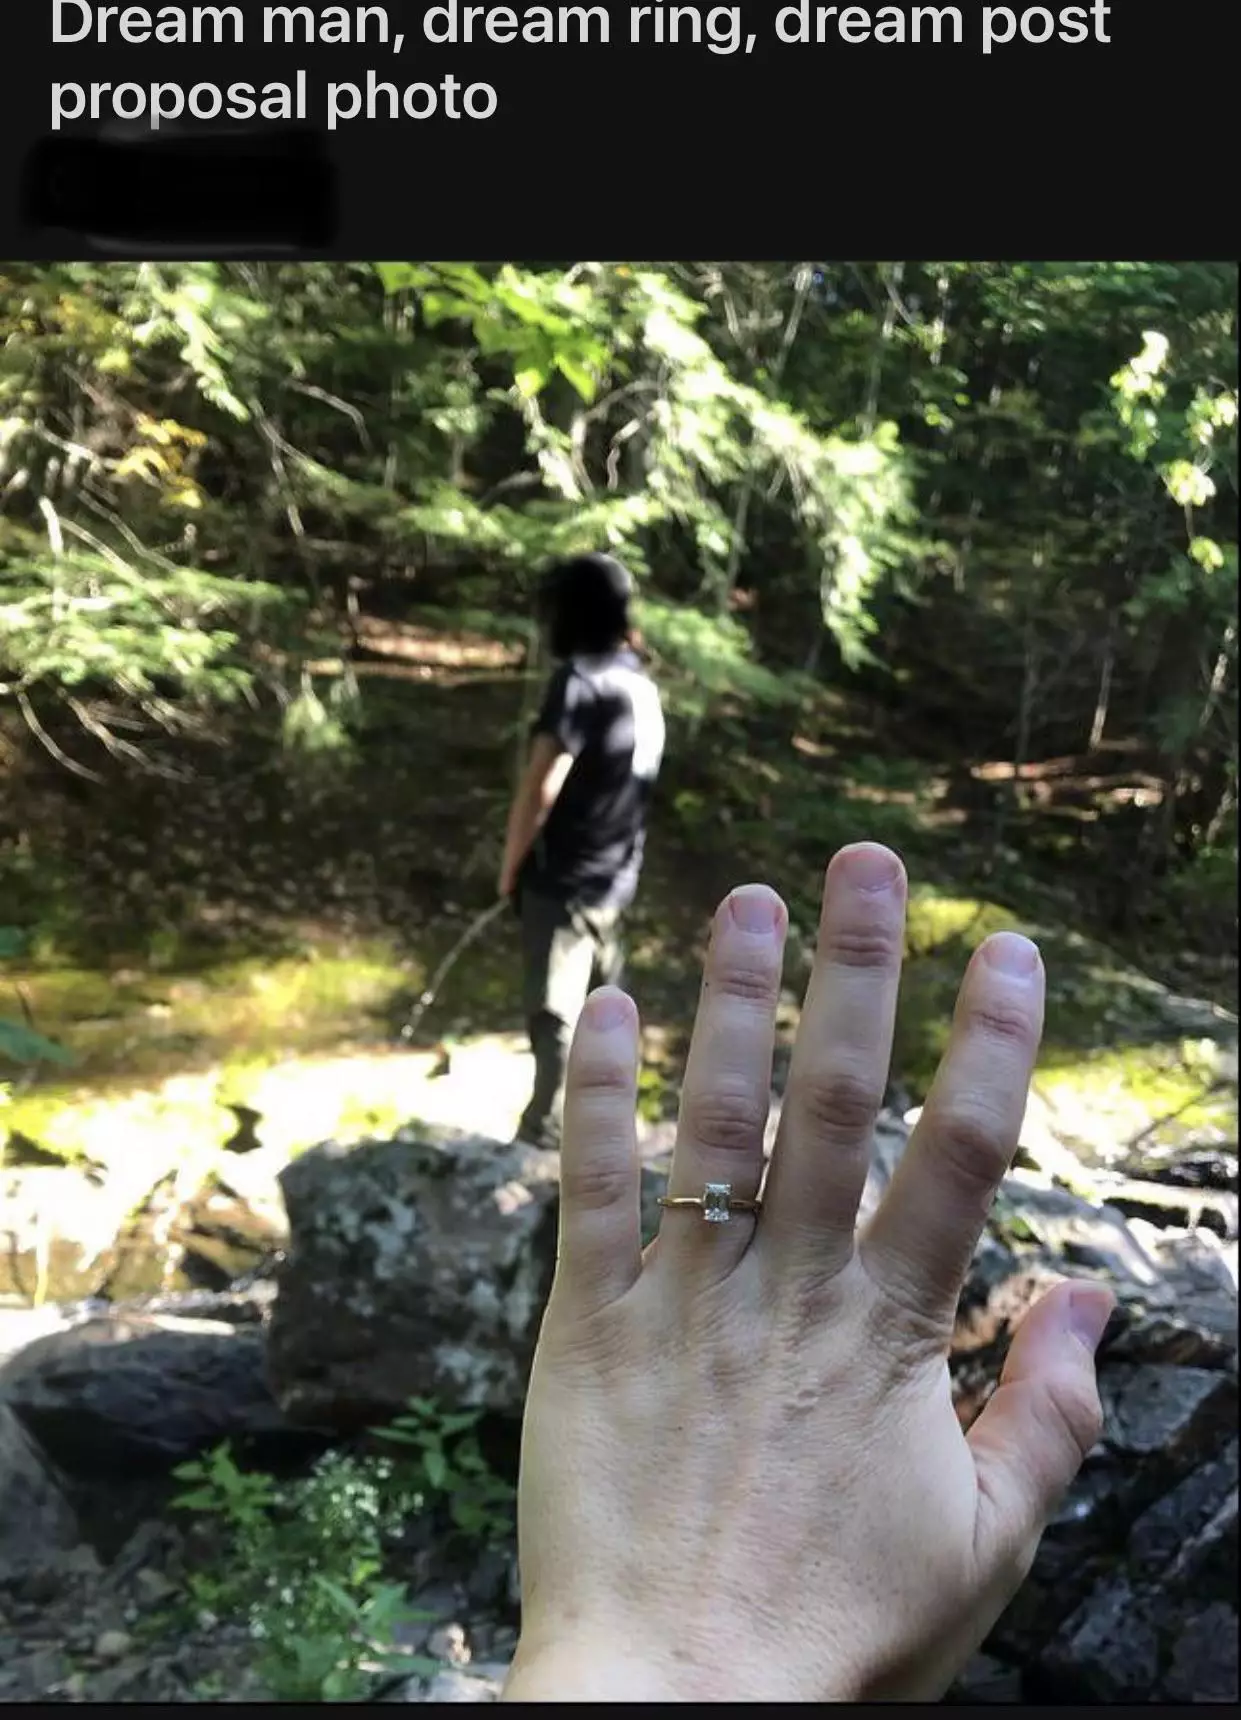 One bride-to-be chose an unusual engagement snap to share on social media (